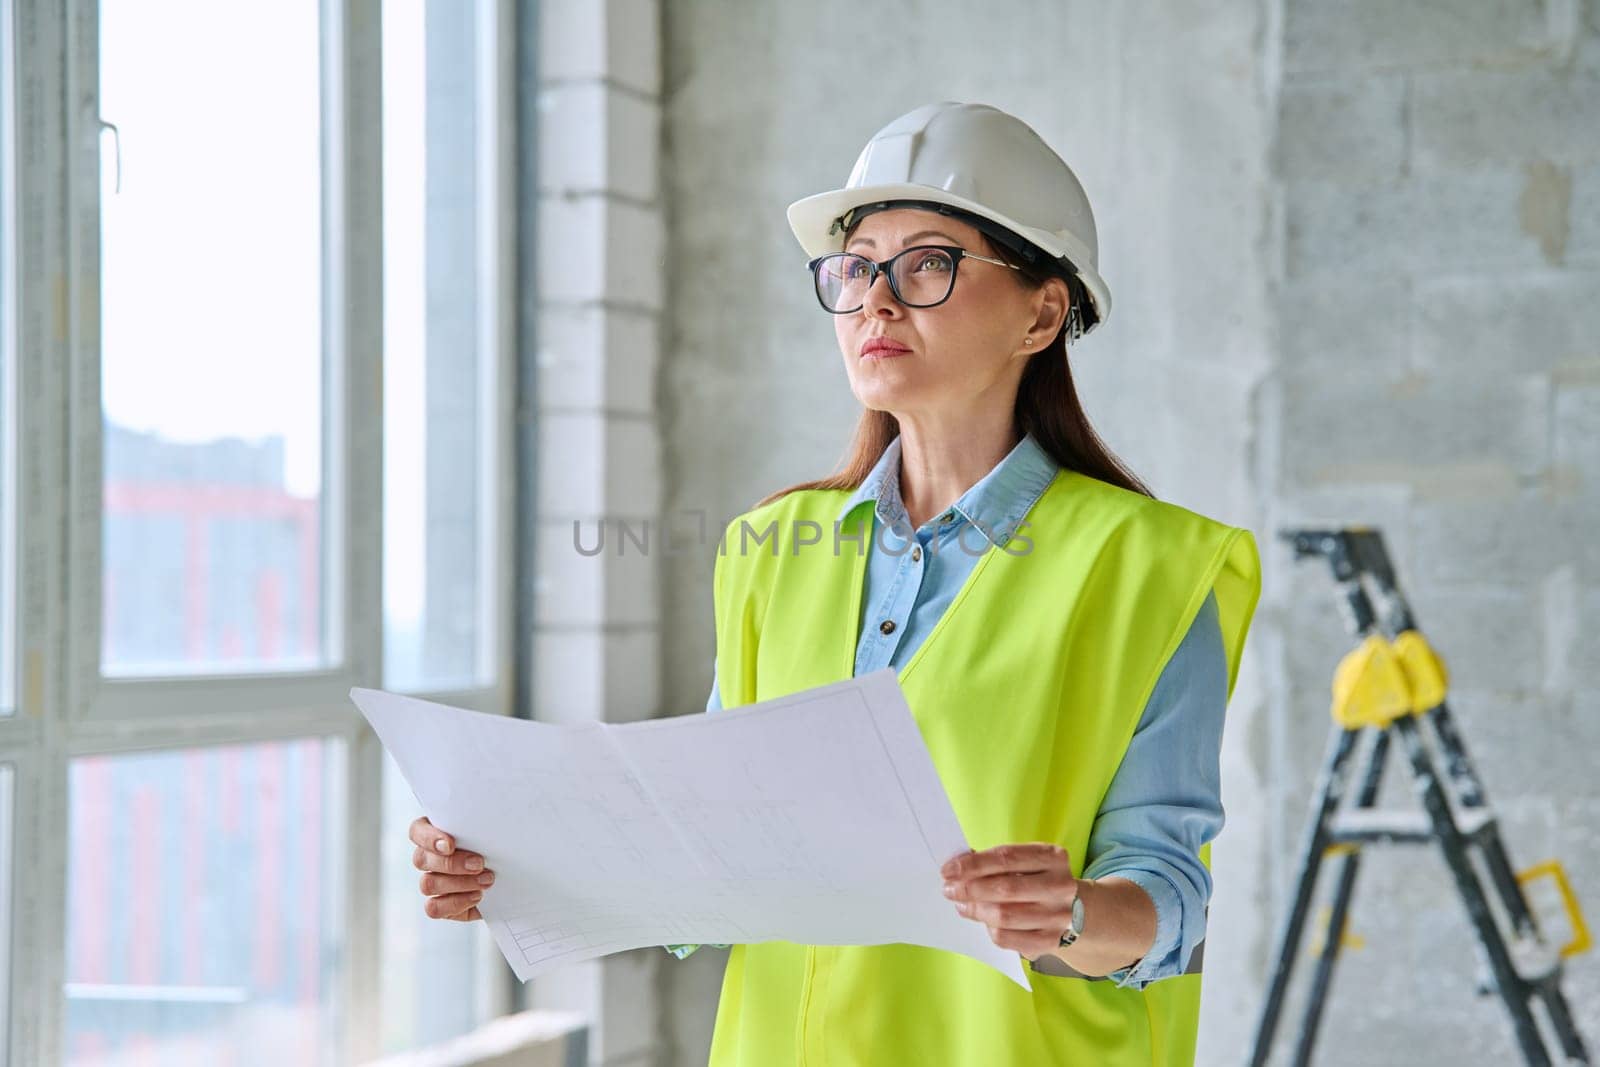 Technical profession woman in protective vest helmet working on construction. Confident serious industrial female engineer builder inspector supervisor architect with papers. Construction industry